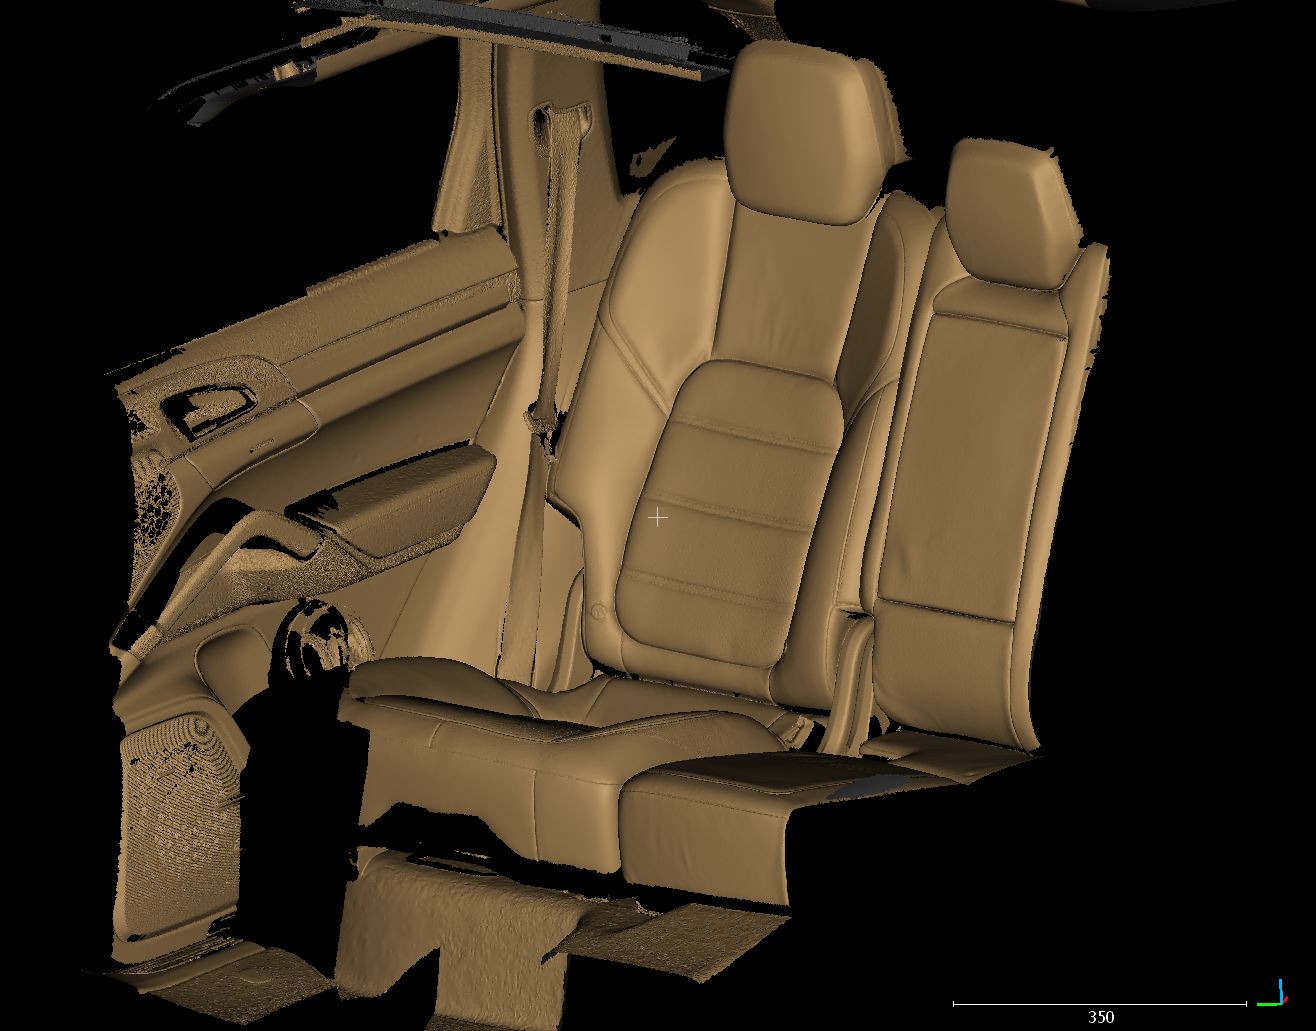 3D scan of the inside of a Porsche Cayenne using Surphaser